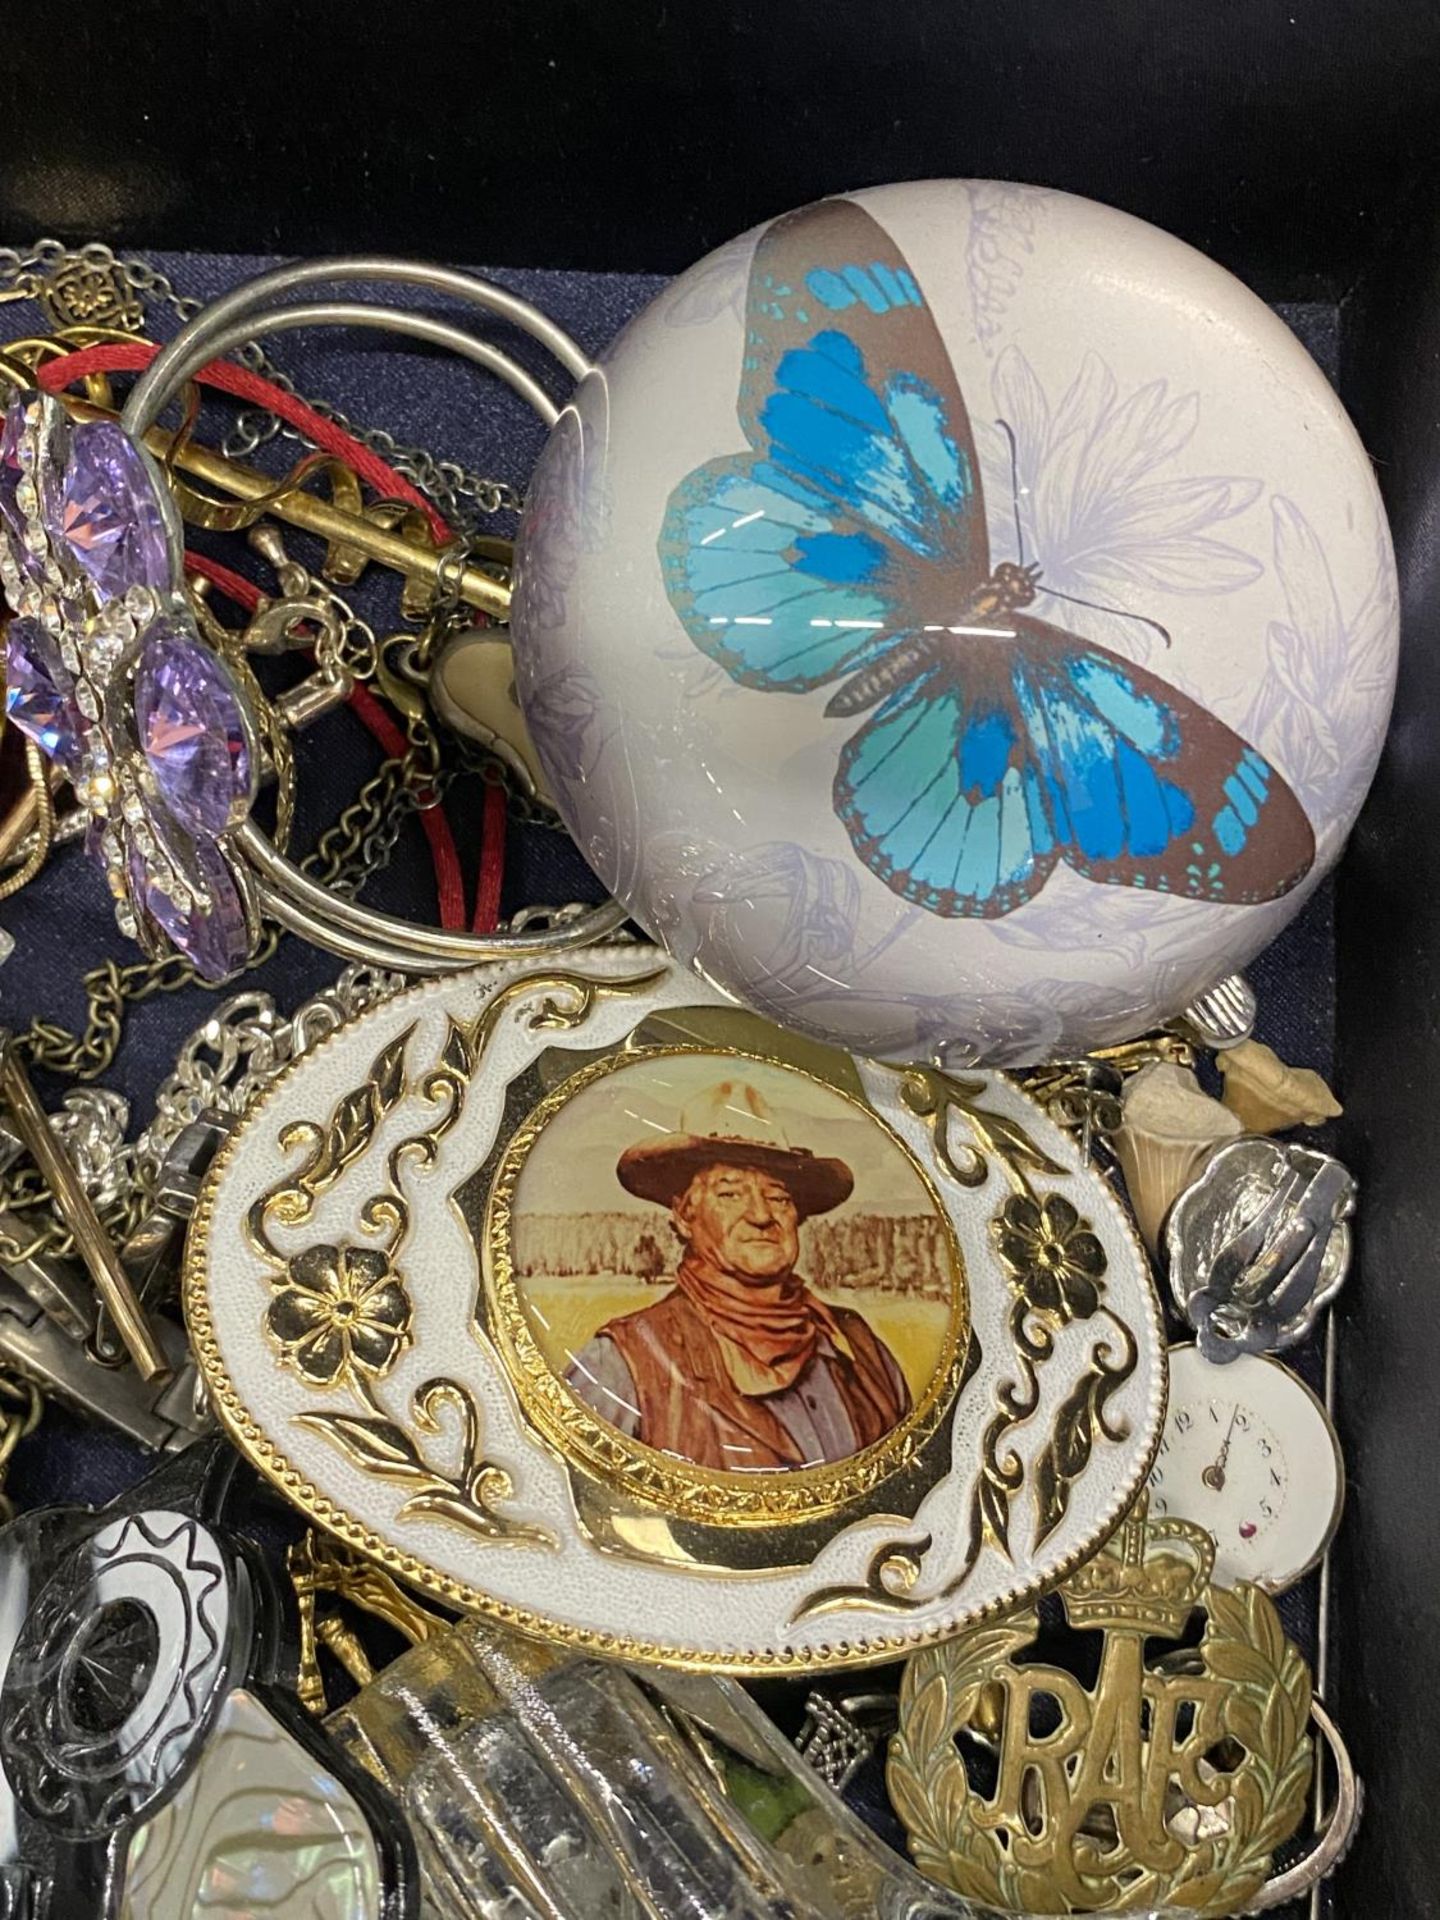 A QUANTITY OF COSTUME JEWELLERY TO INCLUDE NECKLACES, BROOCHES, EARRINGS PILL BOXES, ETC IN A - Image 2 of 3